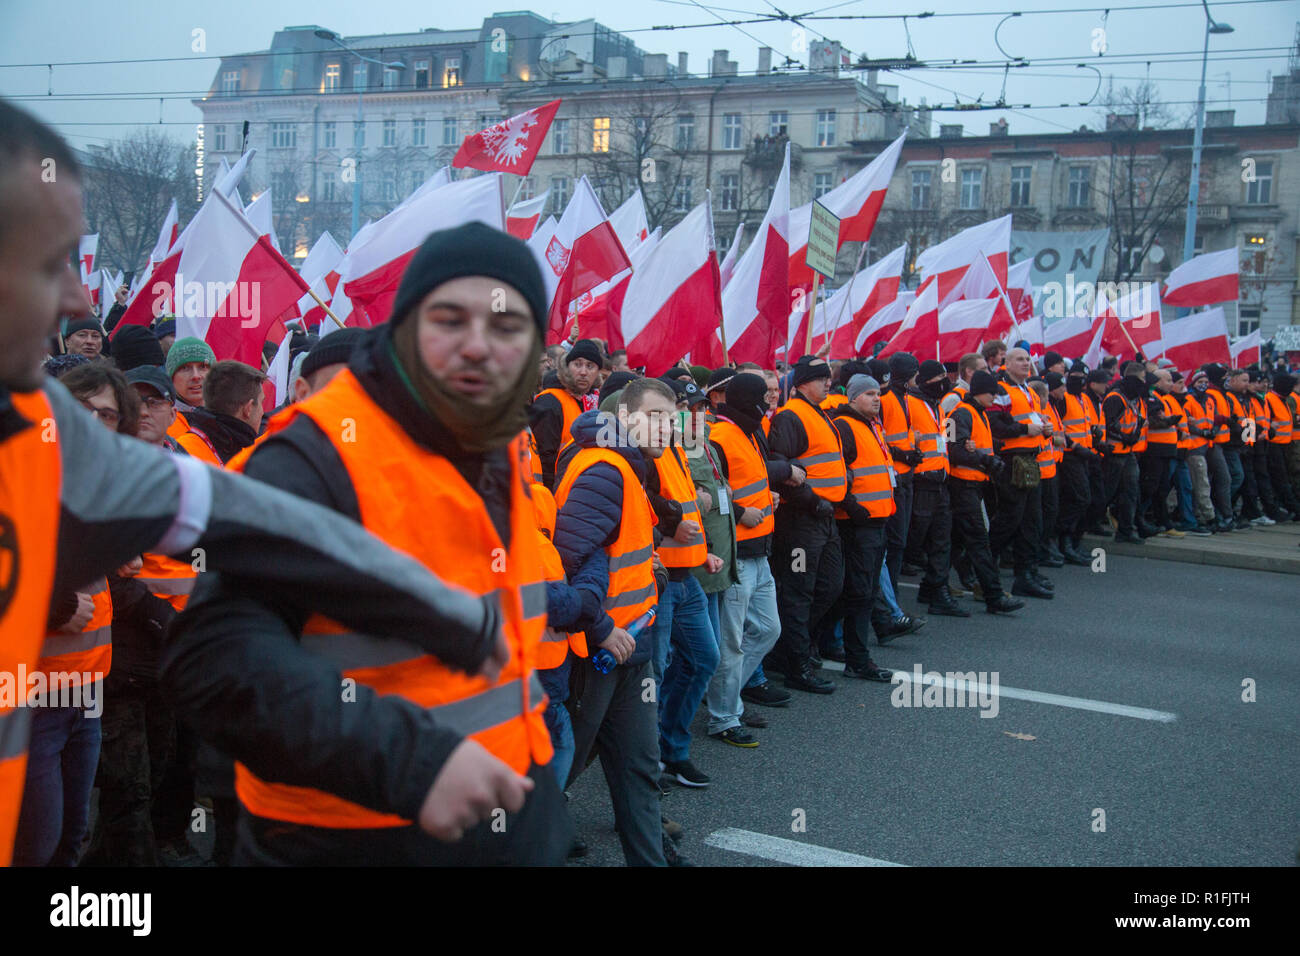 Warsaw, Poland, 11 November 2018: Celebrations of Polish Independence Day in a mass march that gathered more than 200 thousand people Stock Photo